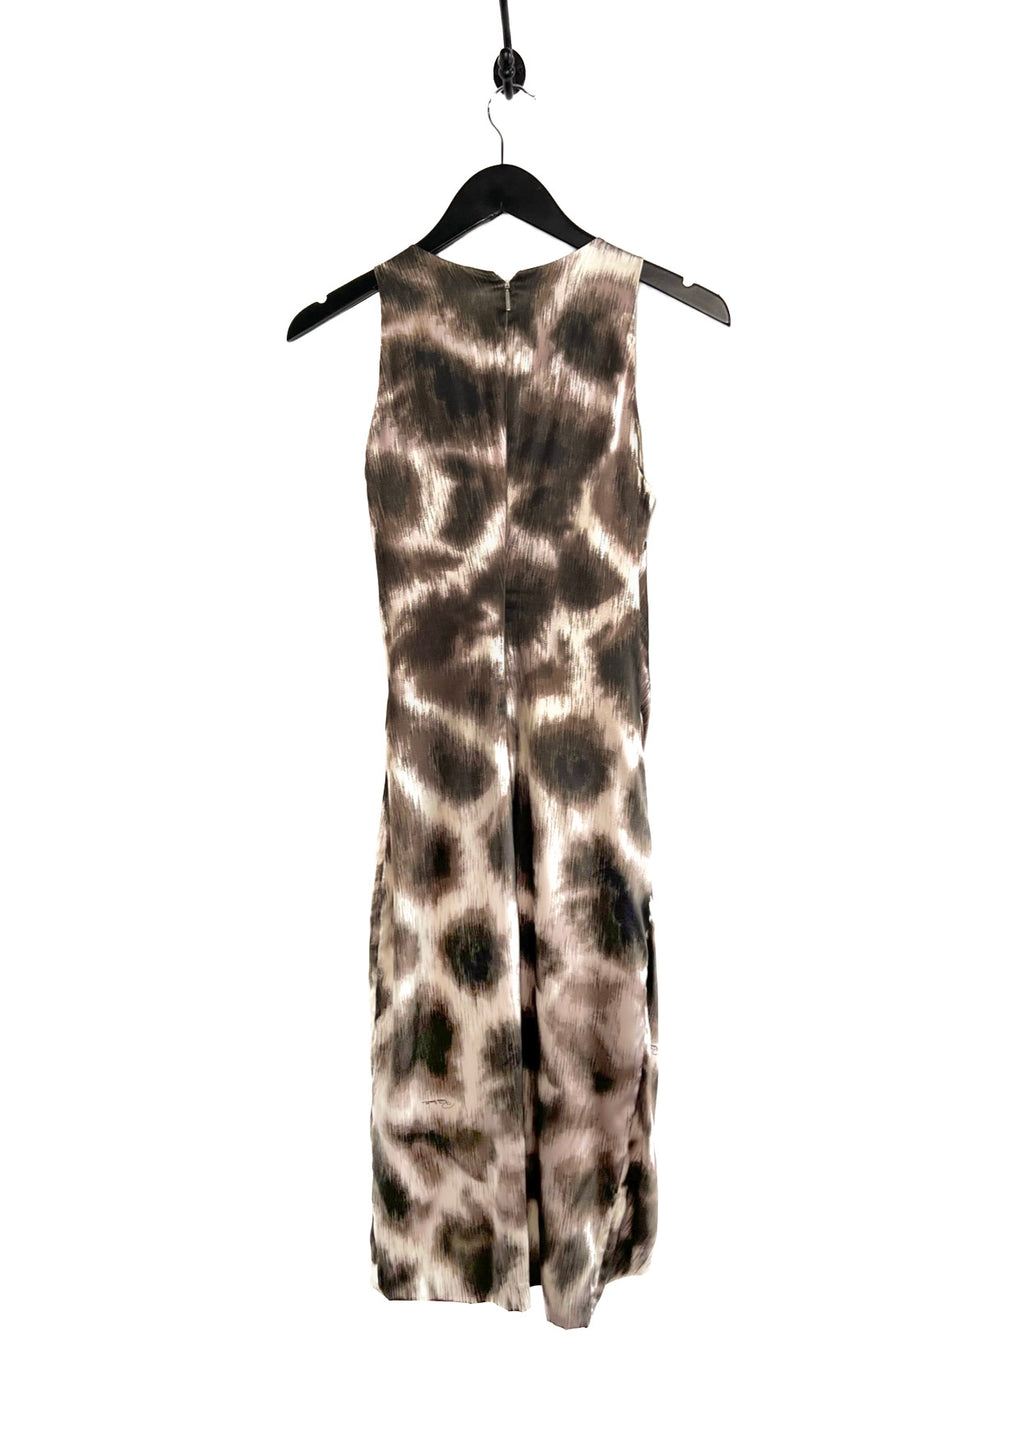 Roberto Cavalli Leopard Dress with Jewelled Knot at Front